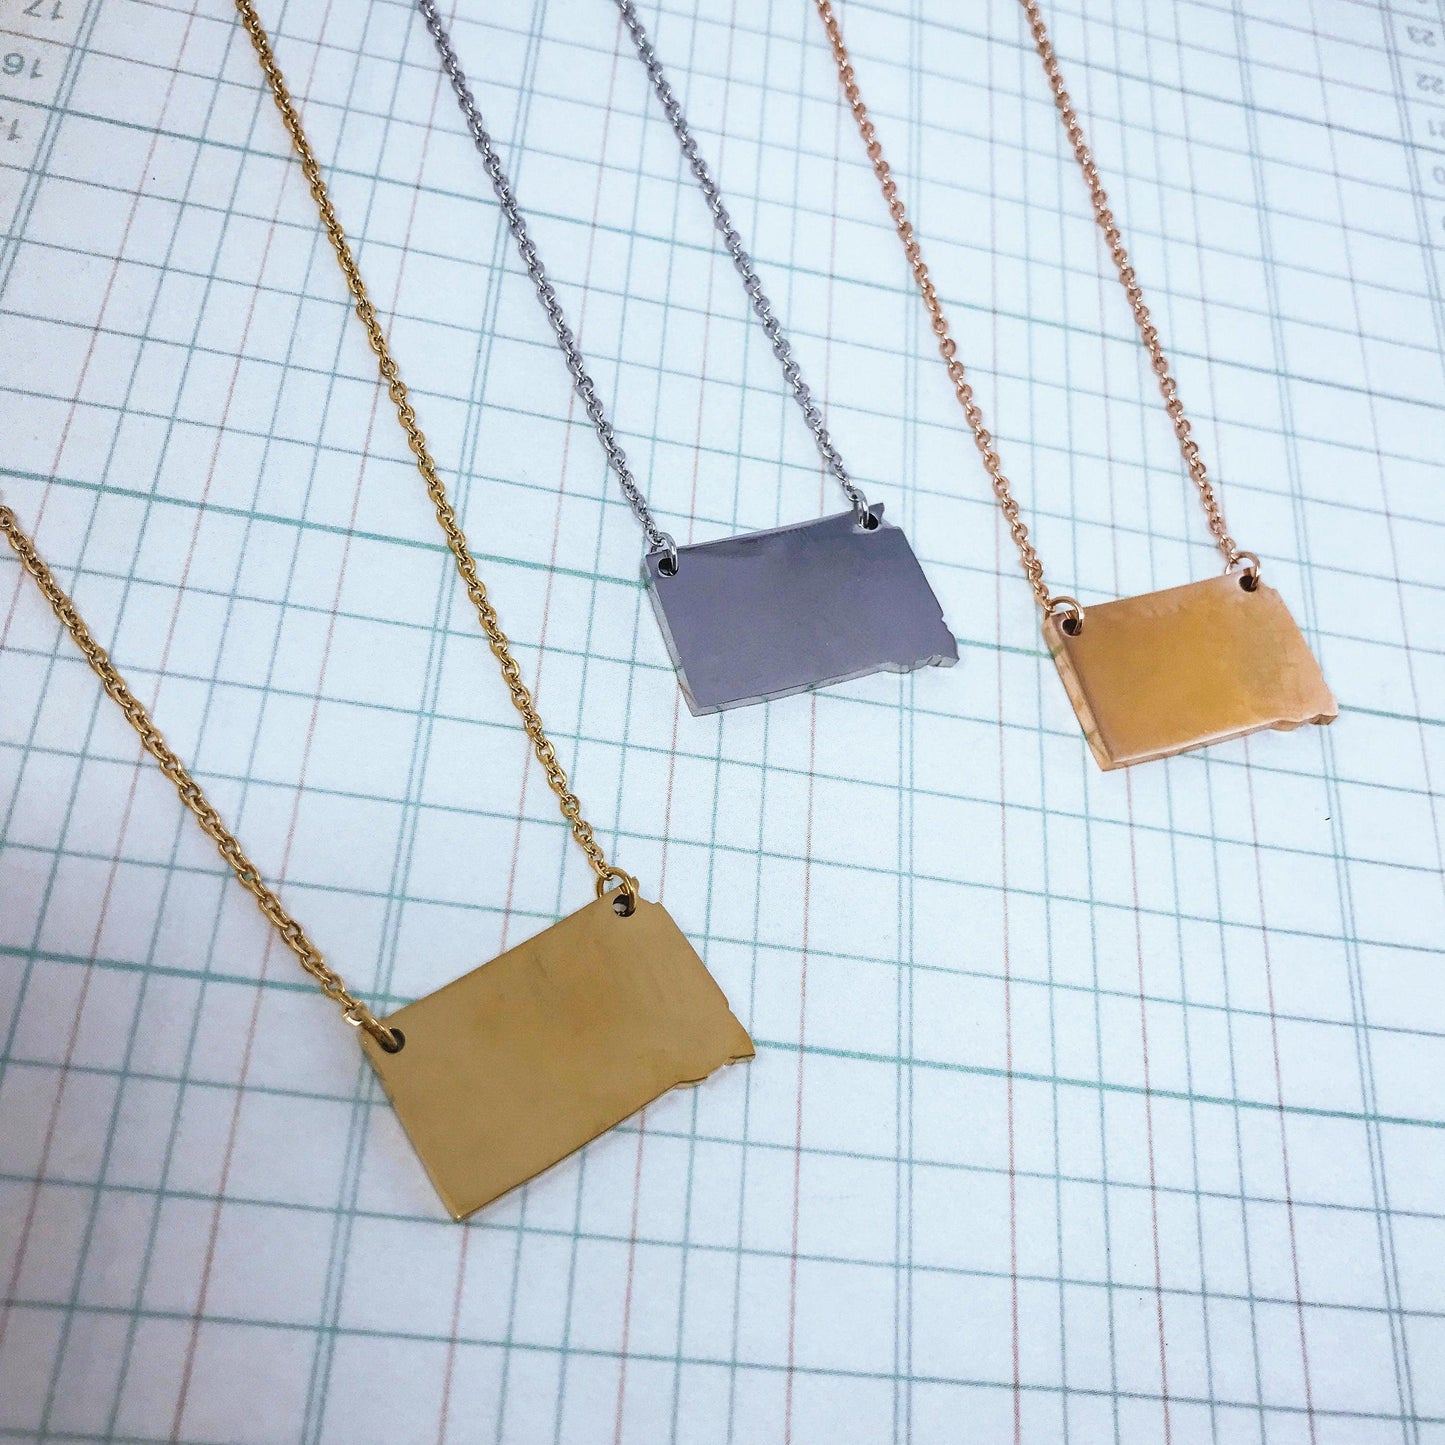 South Dakota State Silhouette Necklaces in 3 different colors: Gold, Silver & Rose Gold